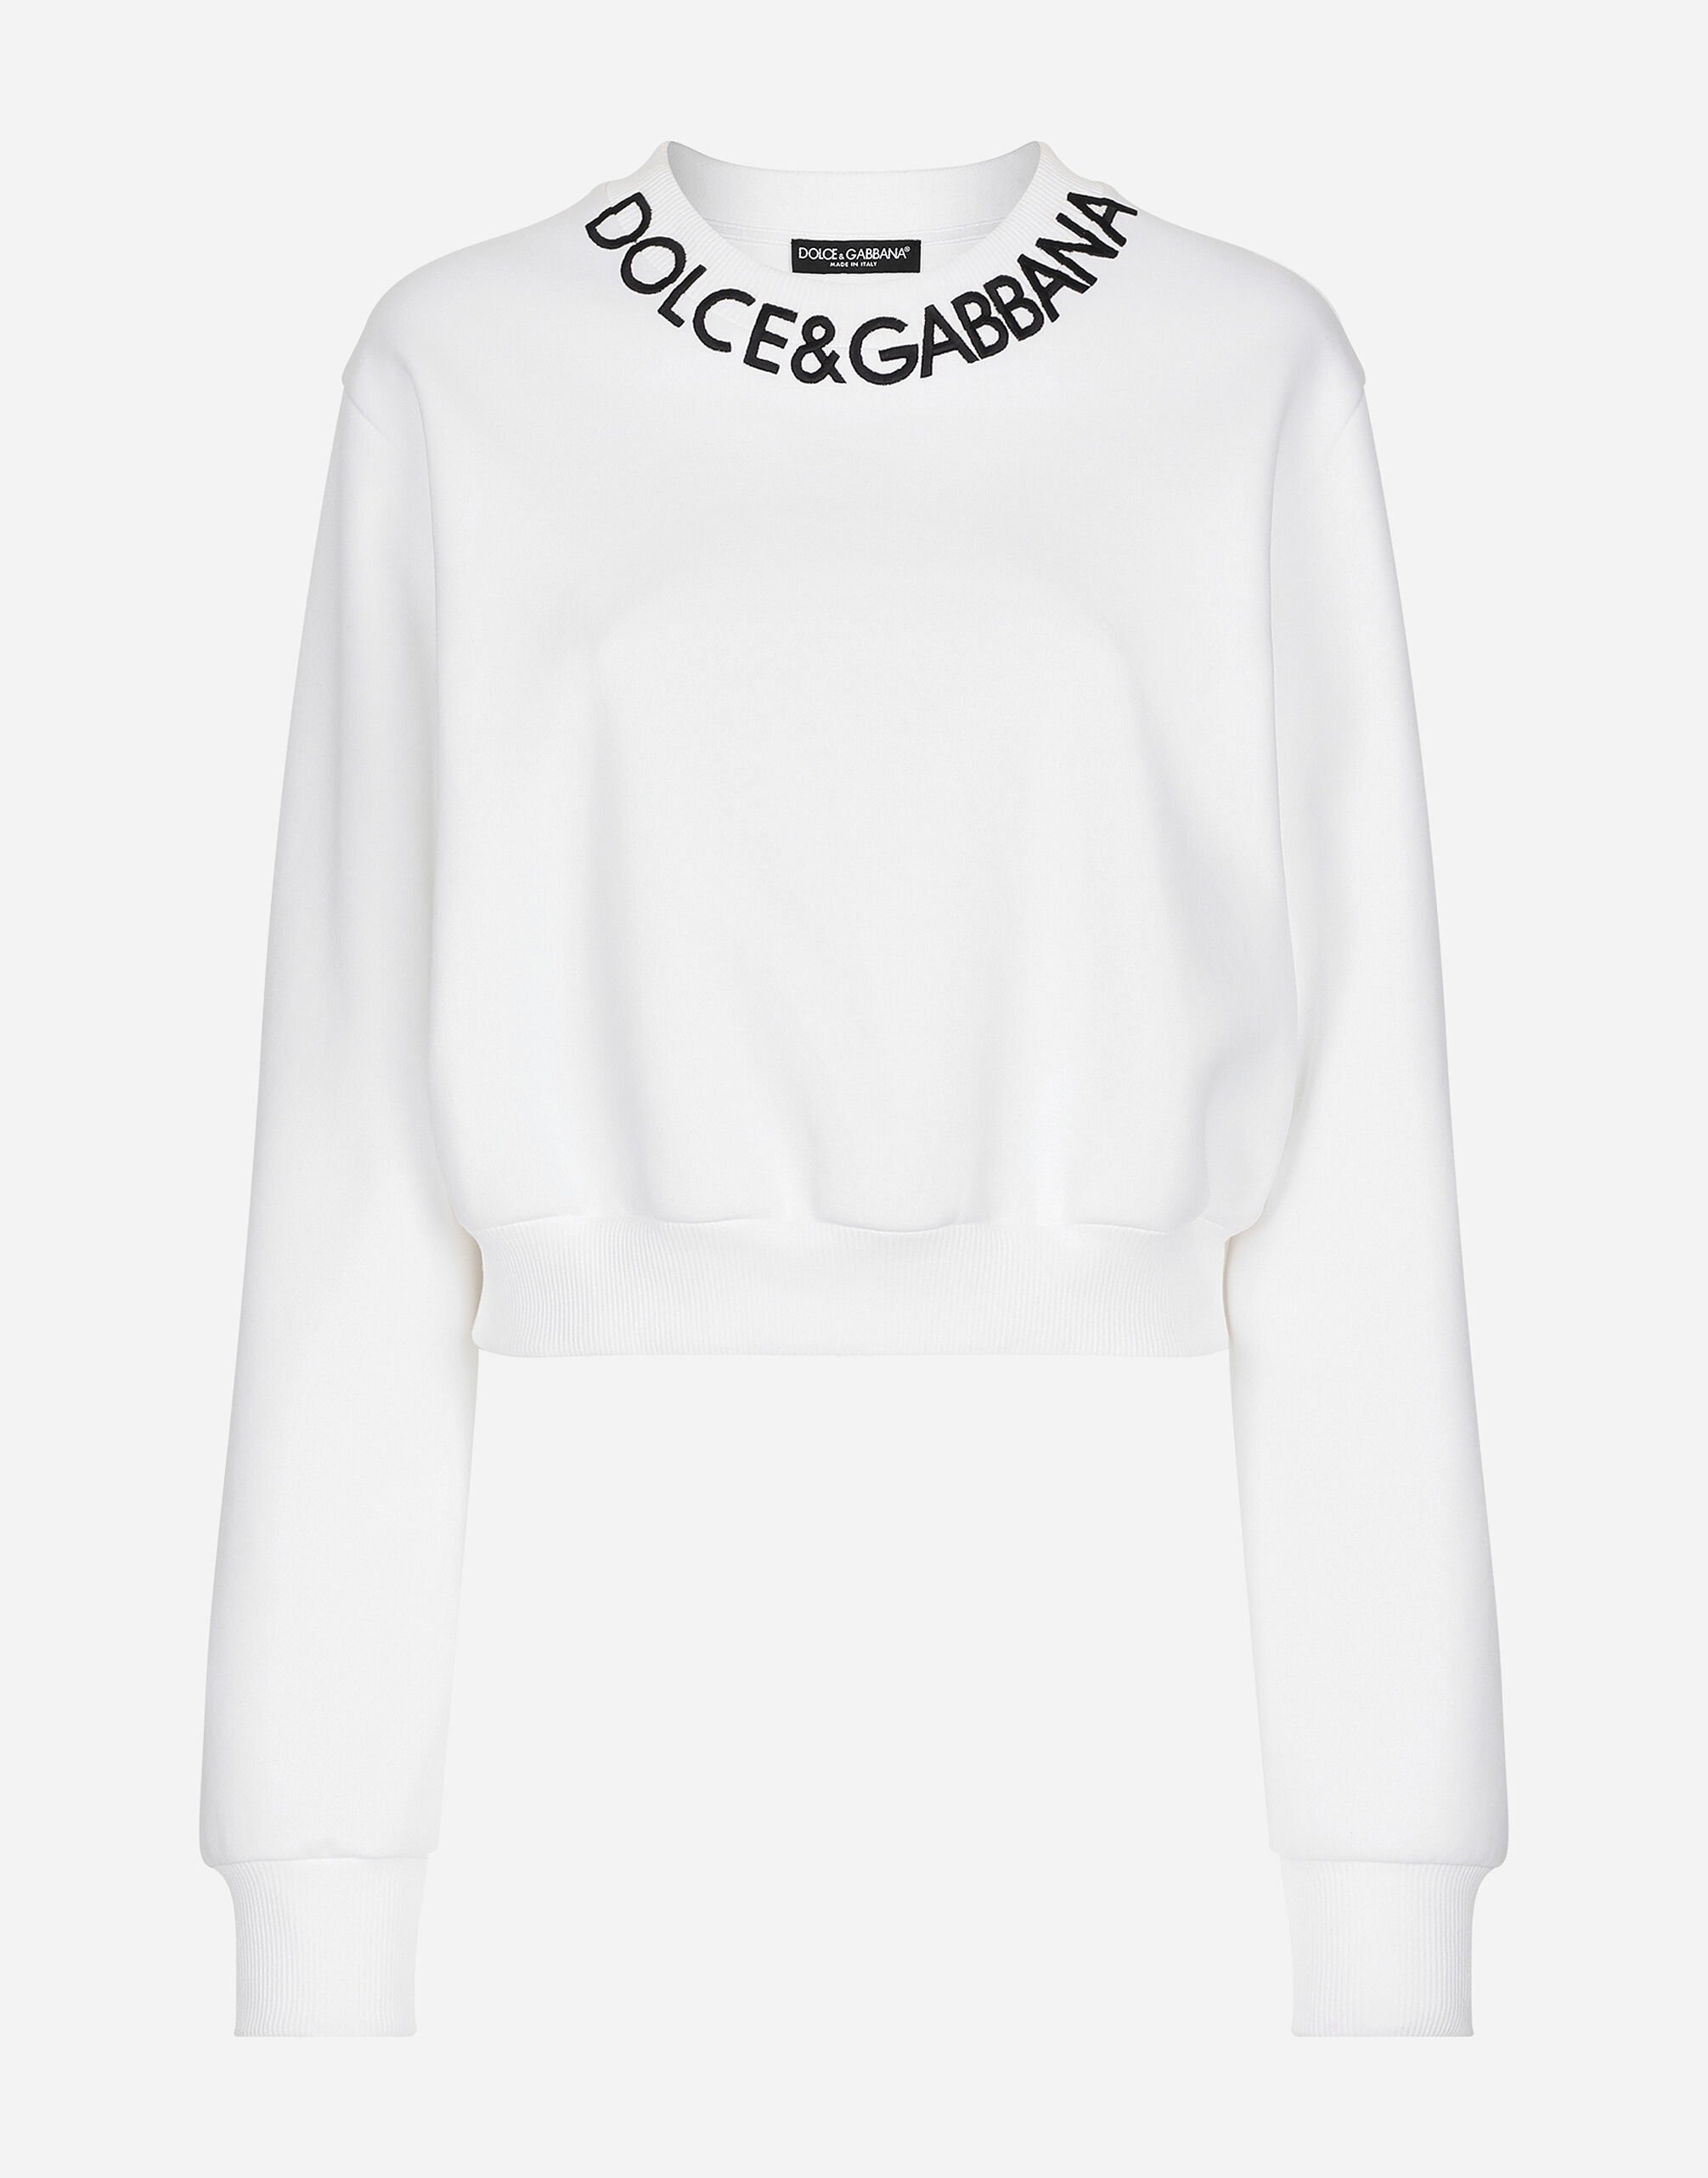 Dolce & Gabbana Cropped jersey sweatshirt with logo embroidery on neck Black FXE03TJBMQ3